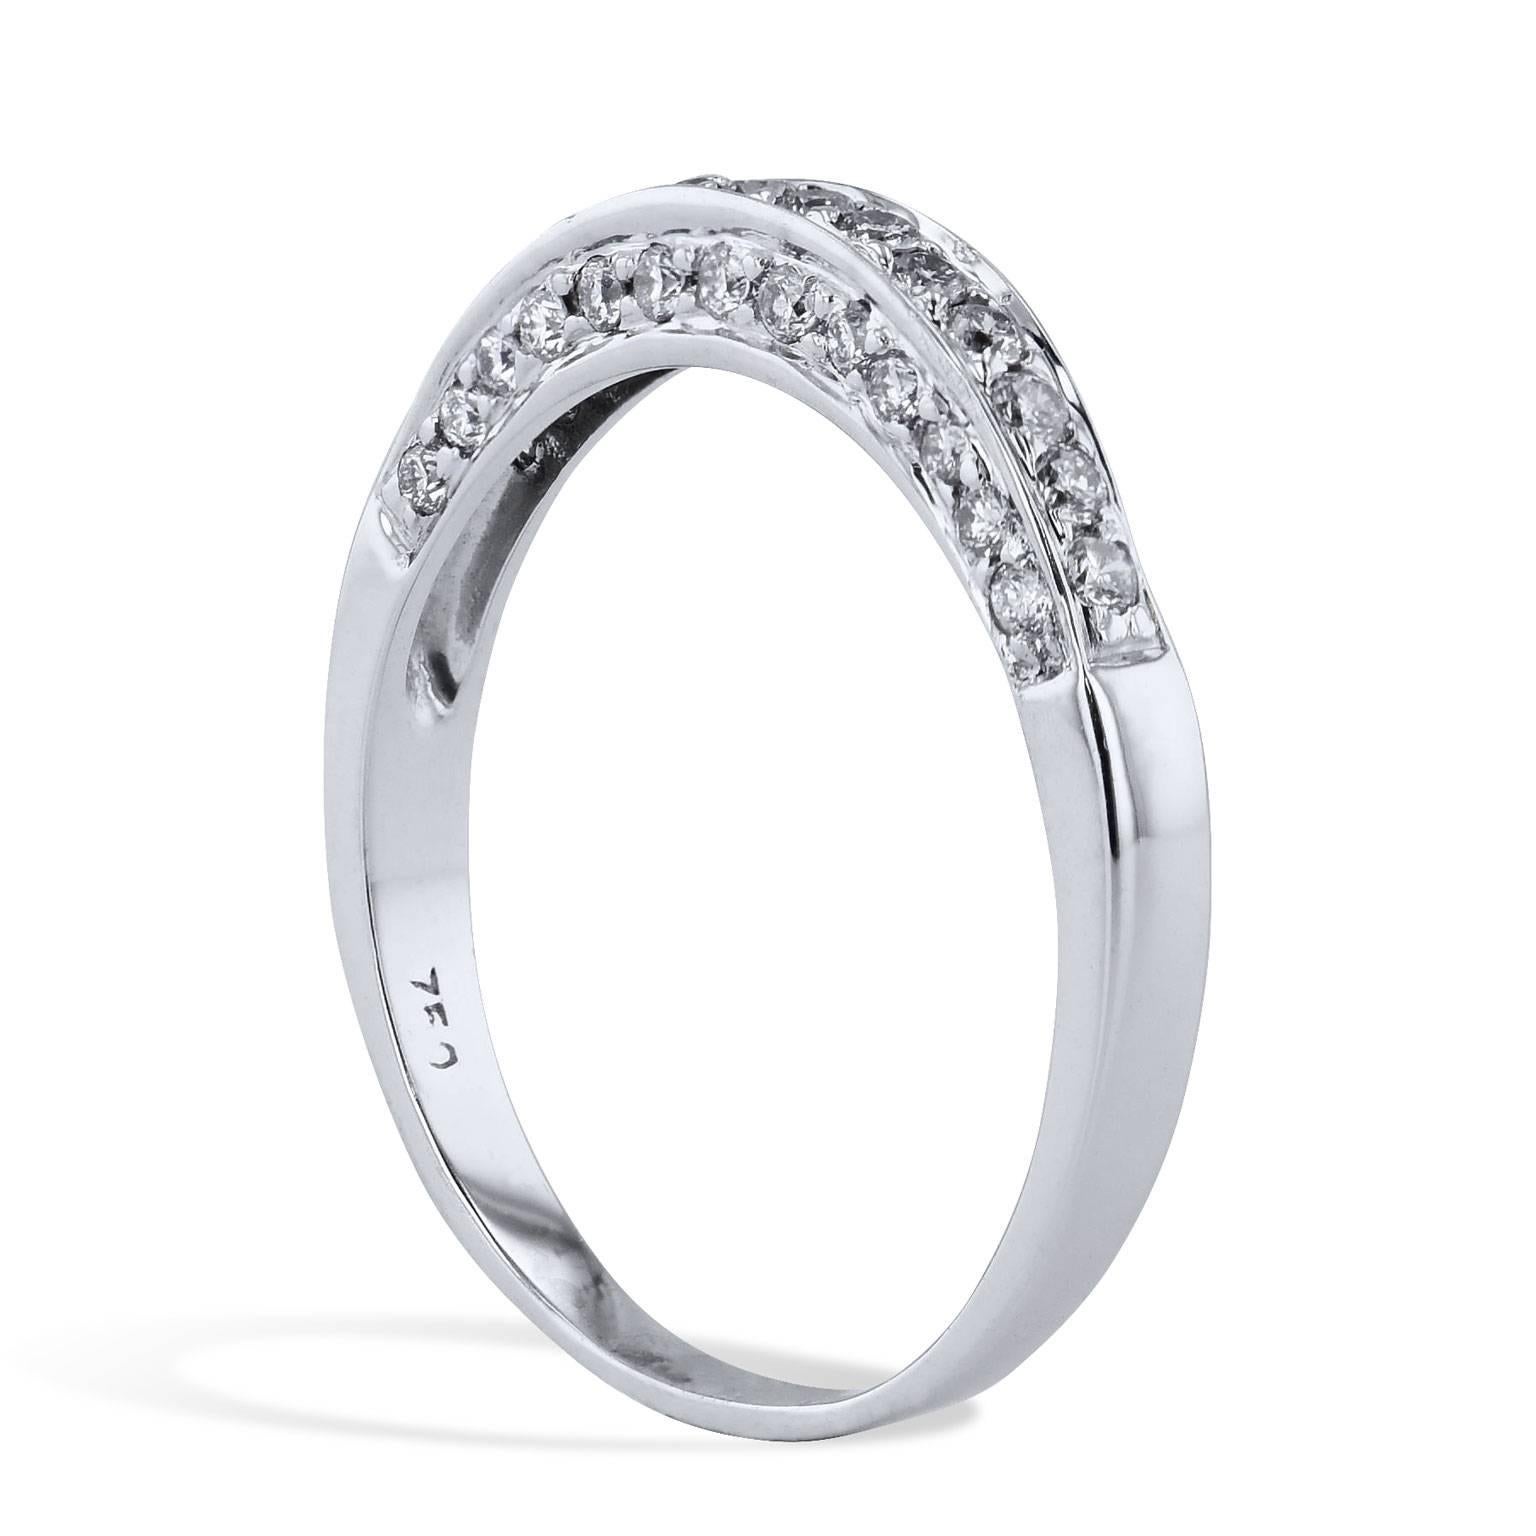 Estate 0.40 Carat Diamond Band Ring in 18 Karat White Gold

Enjoy this previously loved 18 karat white gold band ring featuring forty pave set round diamonds with a total weight of 0.40  carat (H/I/SI3). 
This estate ring is in excellent condition.  